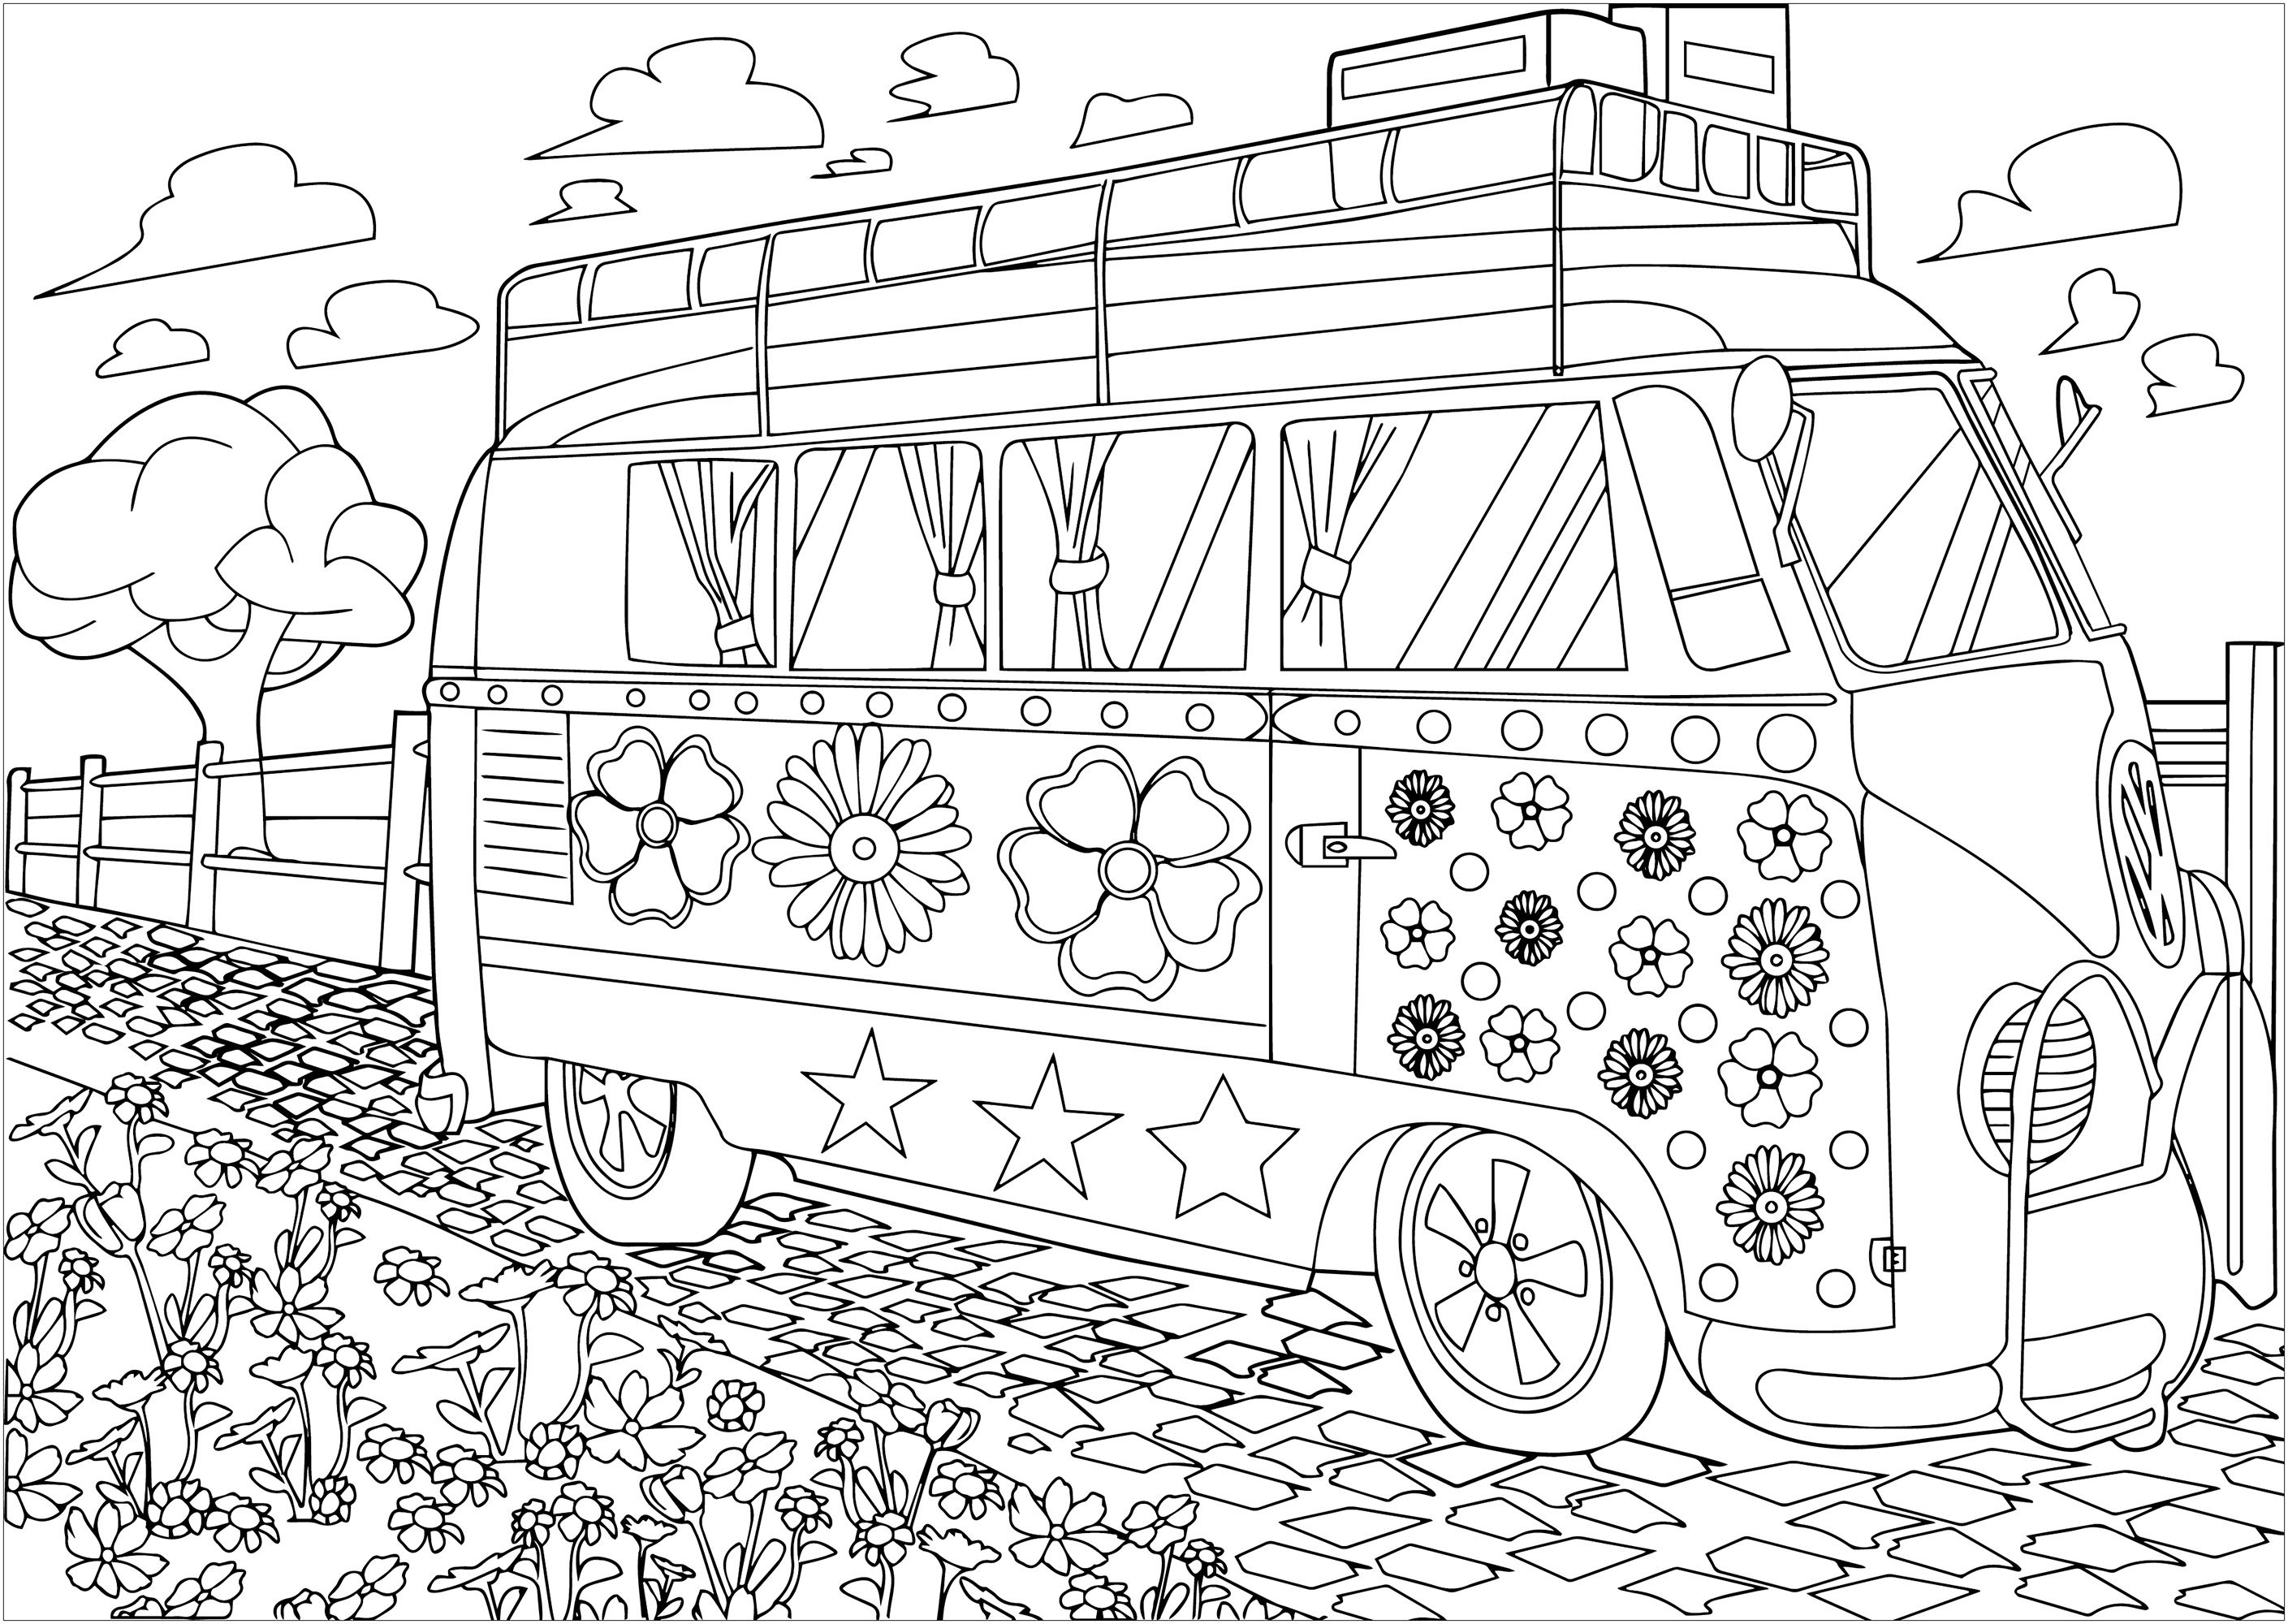 Le combi Volkswagen hippy de Woodstock à colorier. The Volkswagen combi, with its colorful paintwork and peace symbols, became the mobile symbol of the hippie counterculture. Its presence at Woodstock in 1969 made it the unfailing icon of this era of liberation and music, Artist : Morgan